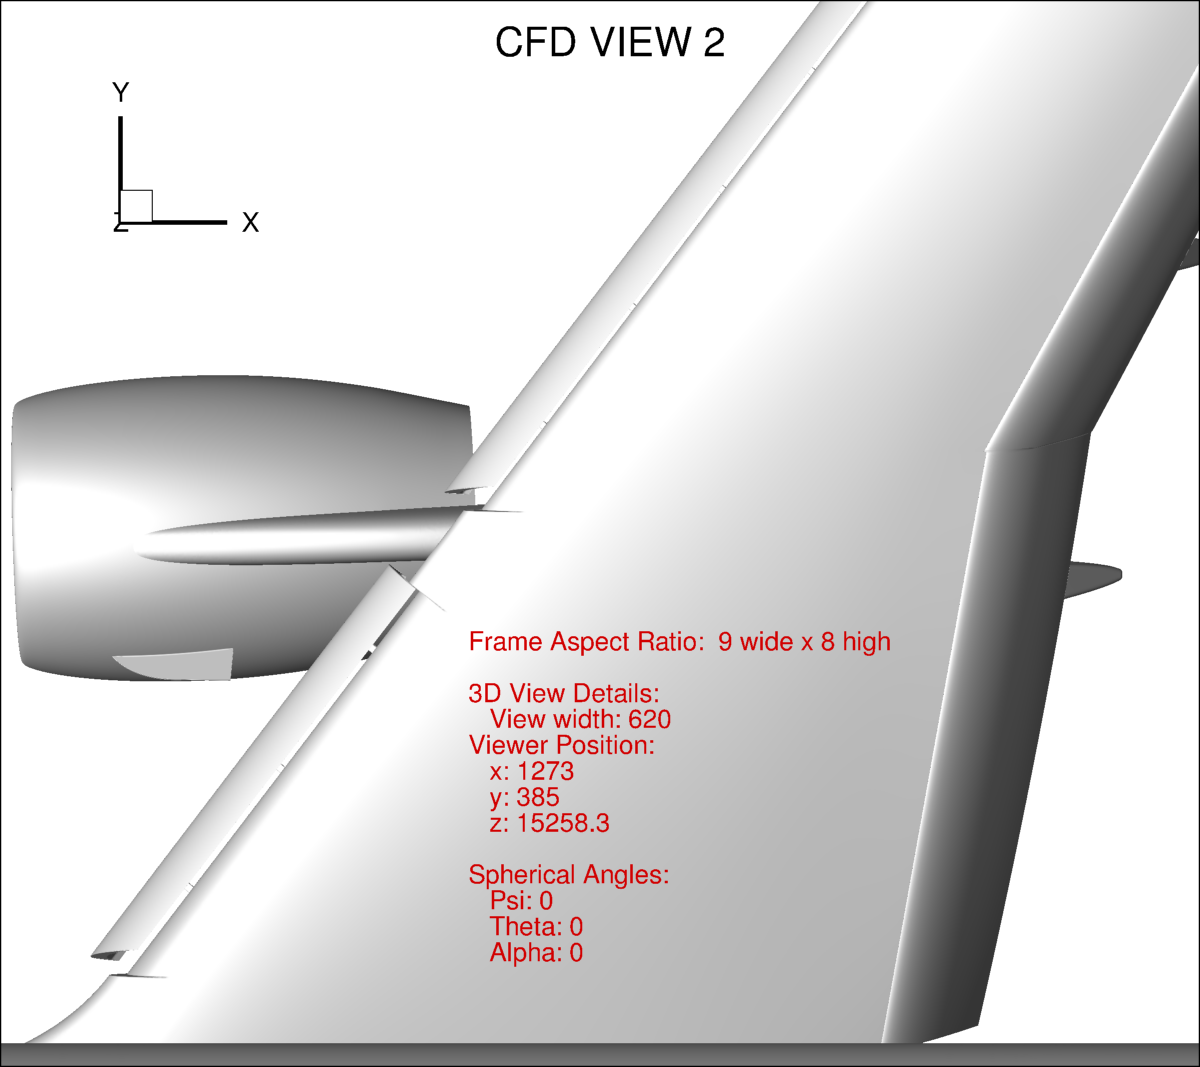 Example CFD view #2